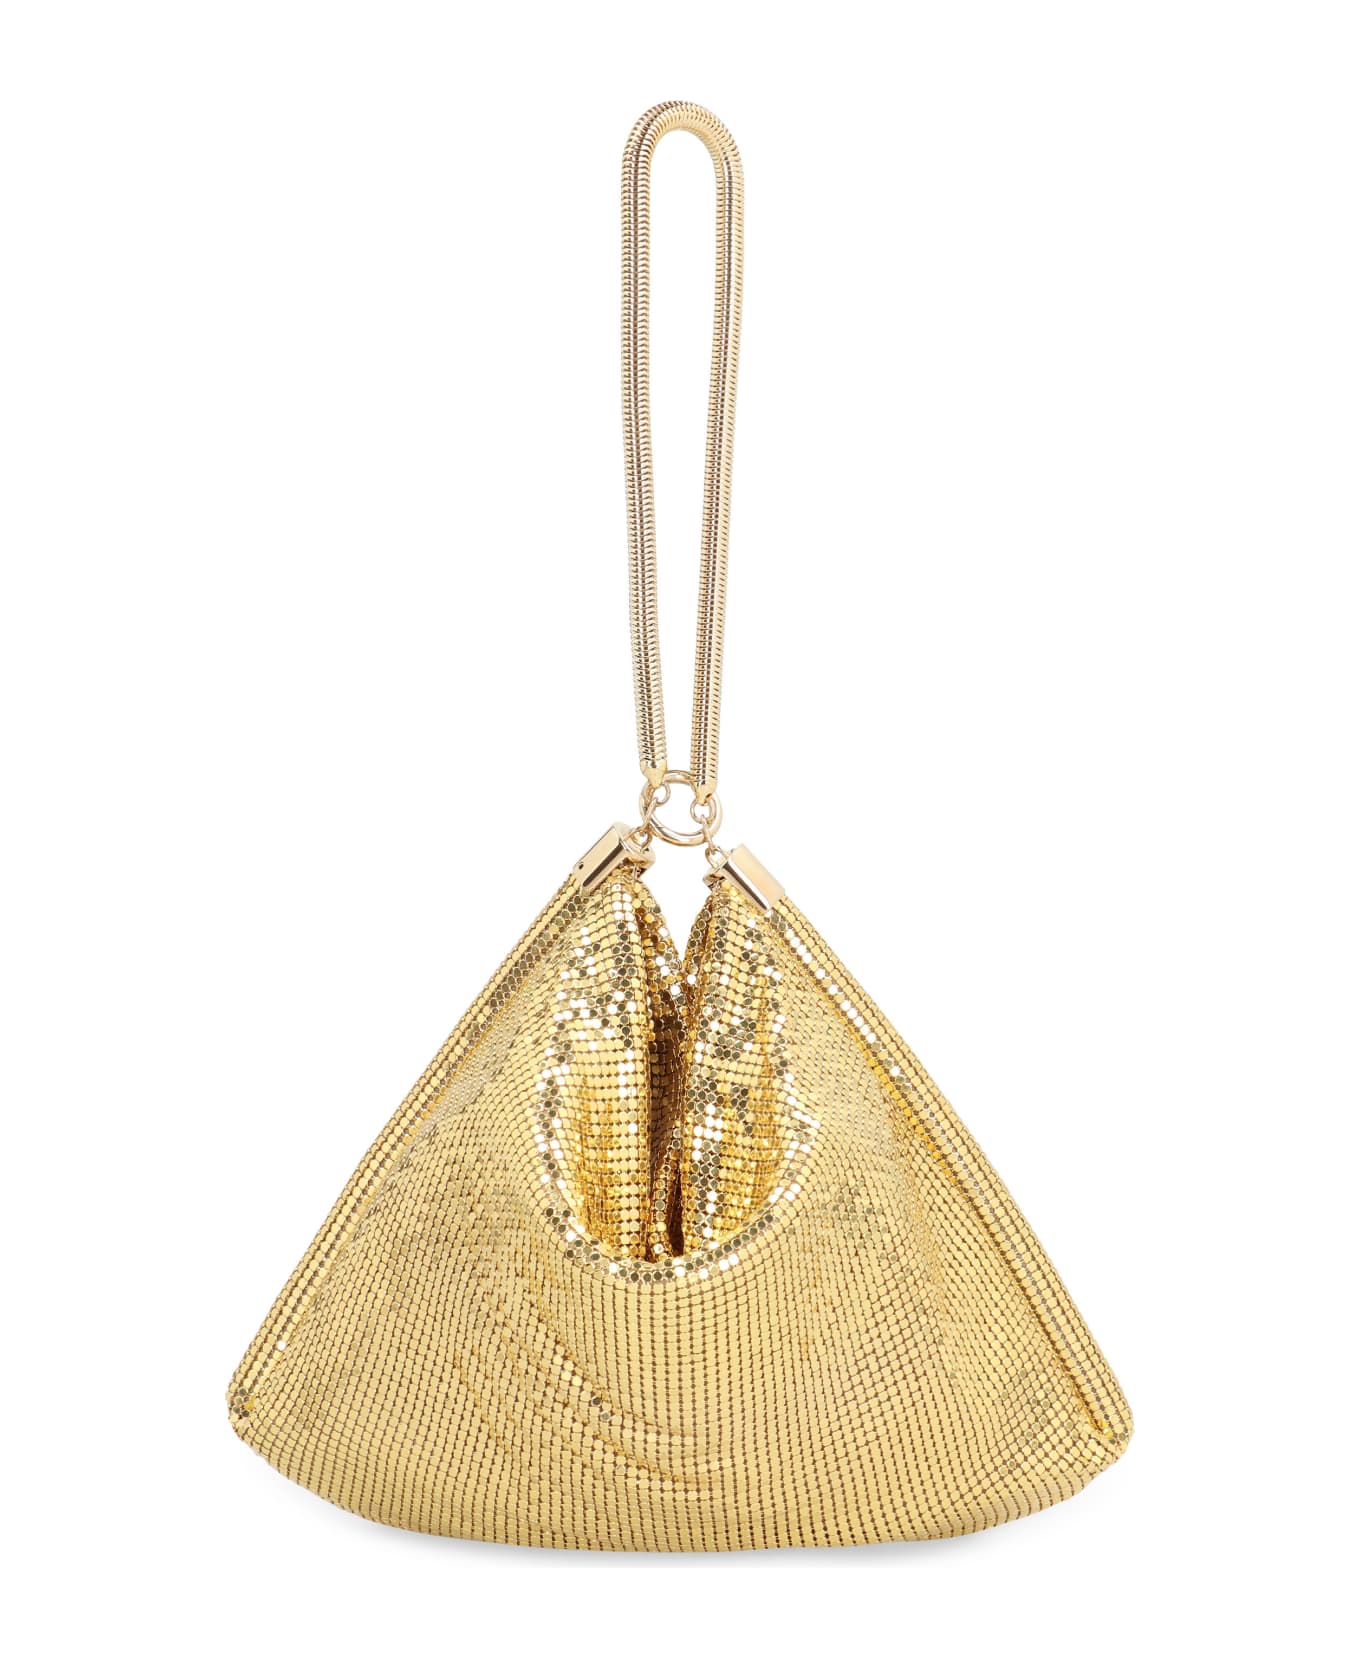 Paco Rabanne Chainmail Pocket Bag - gold トートバッグ